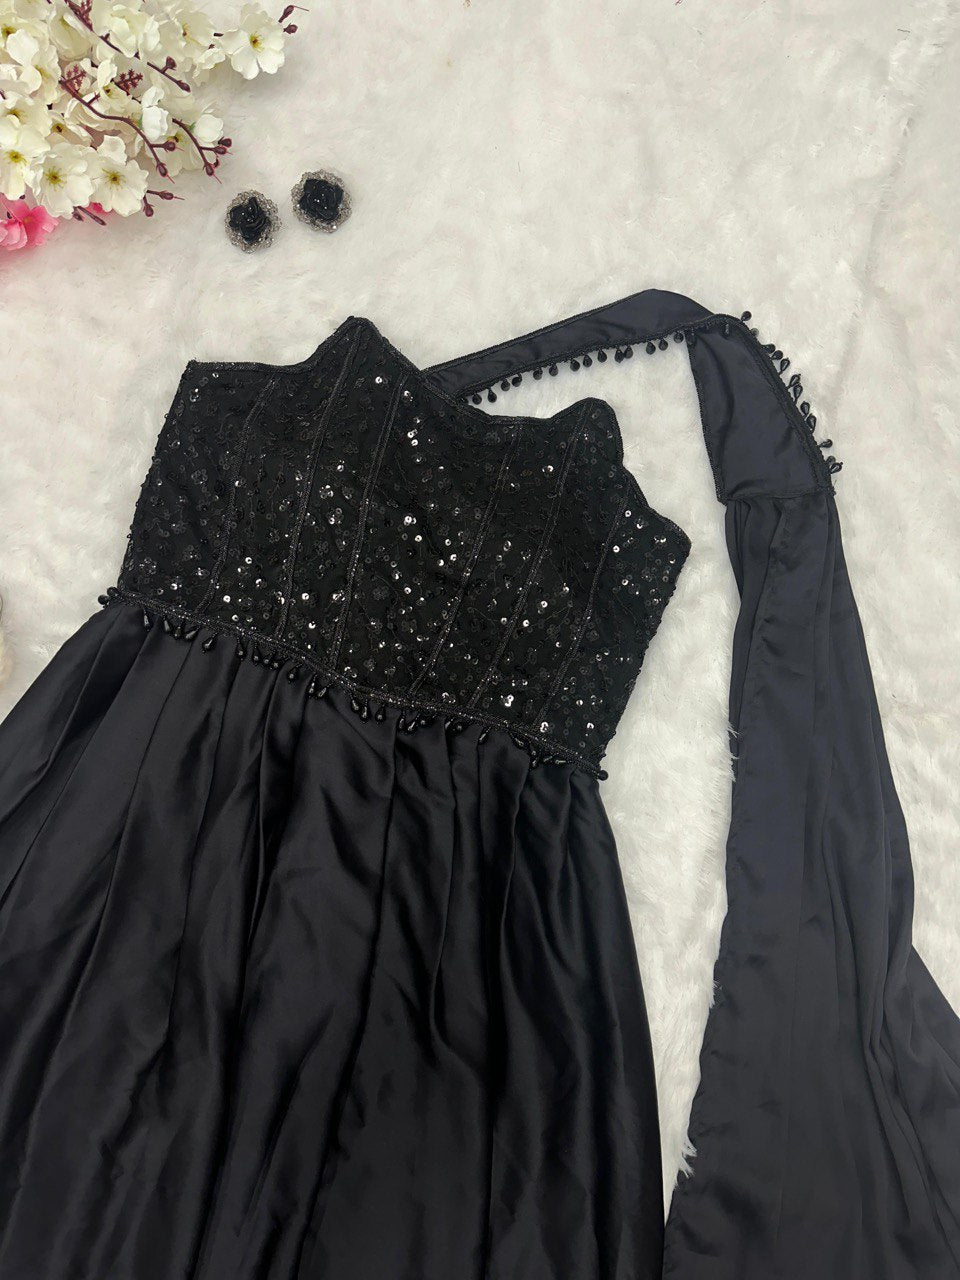 "Black Satin Silk Gown with Sequin & Handwork Lace Detailing - Elegant Western Wear for Special Occasions"